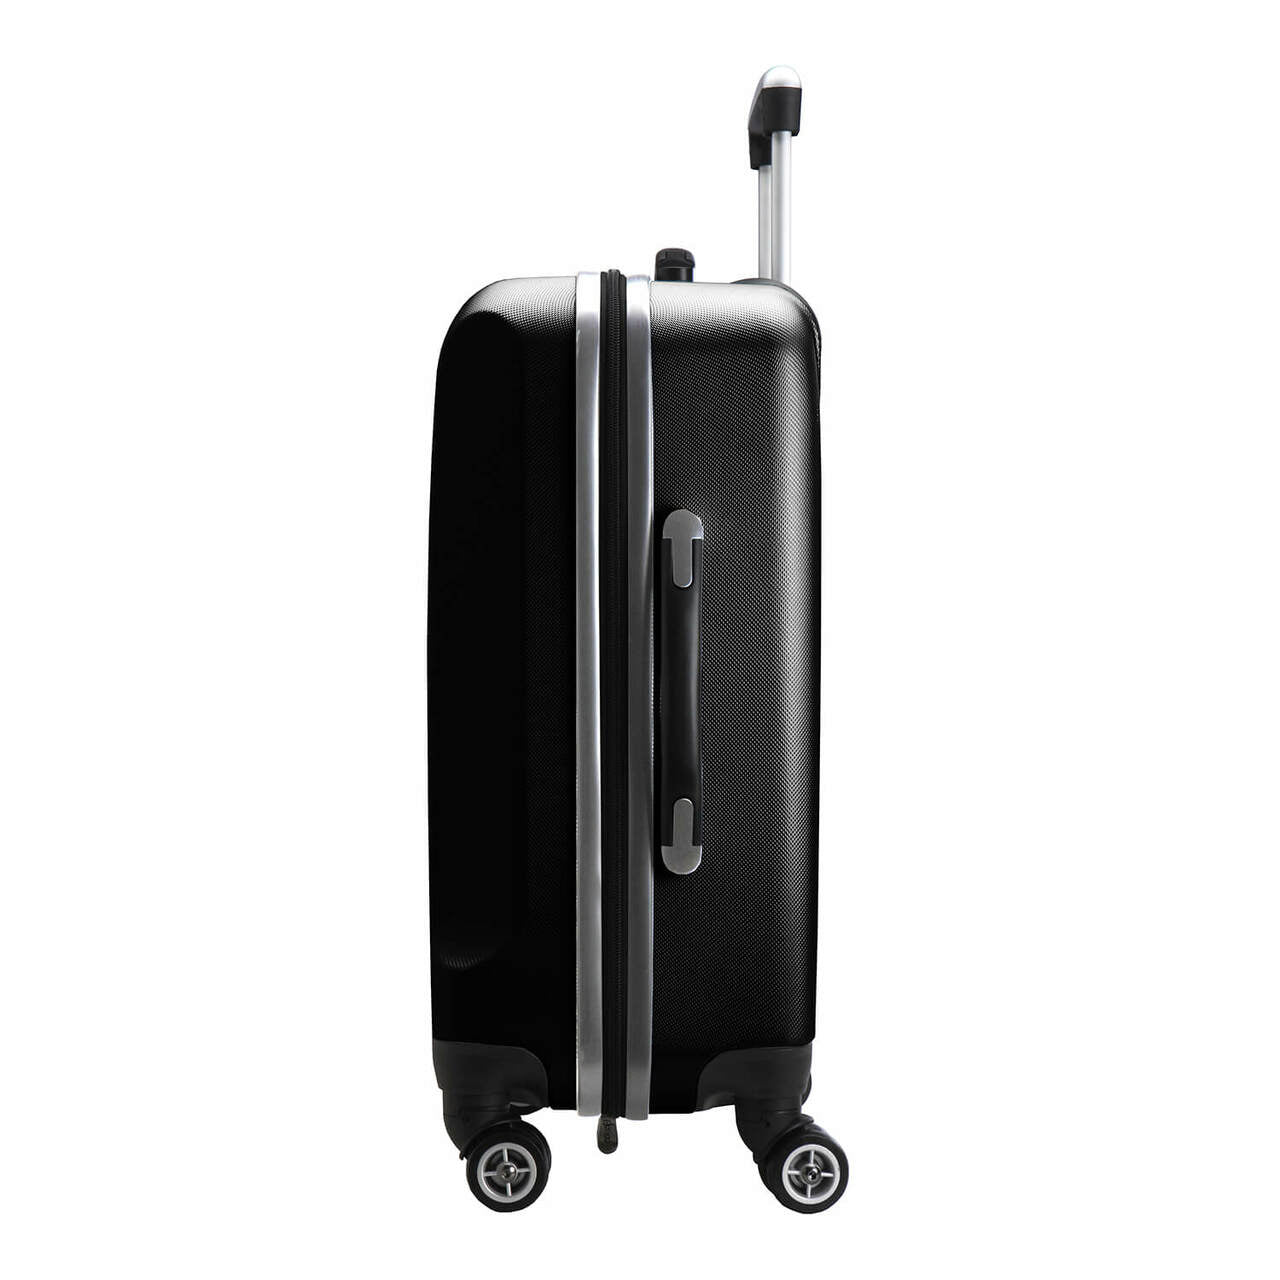 Providence College 20" Hardcase Luggage Carry-on Spinner